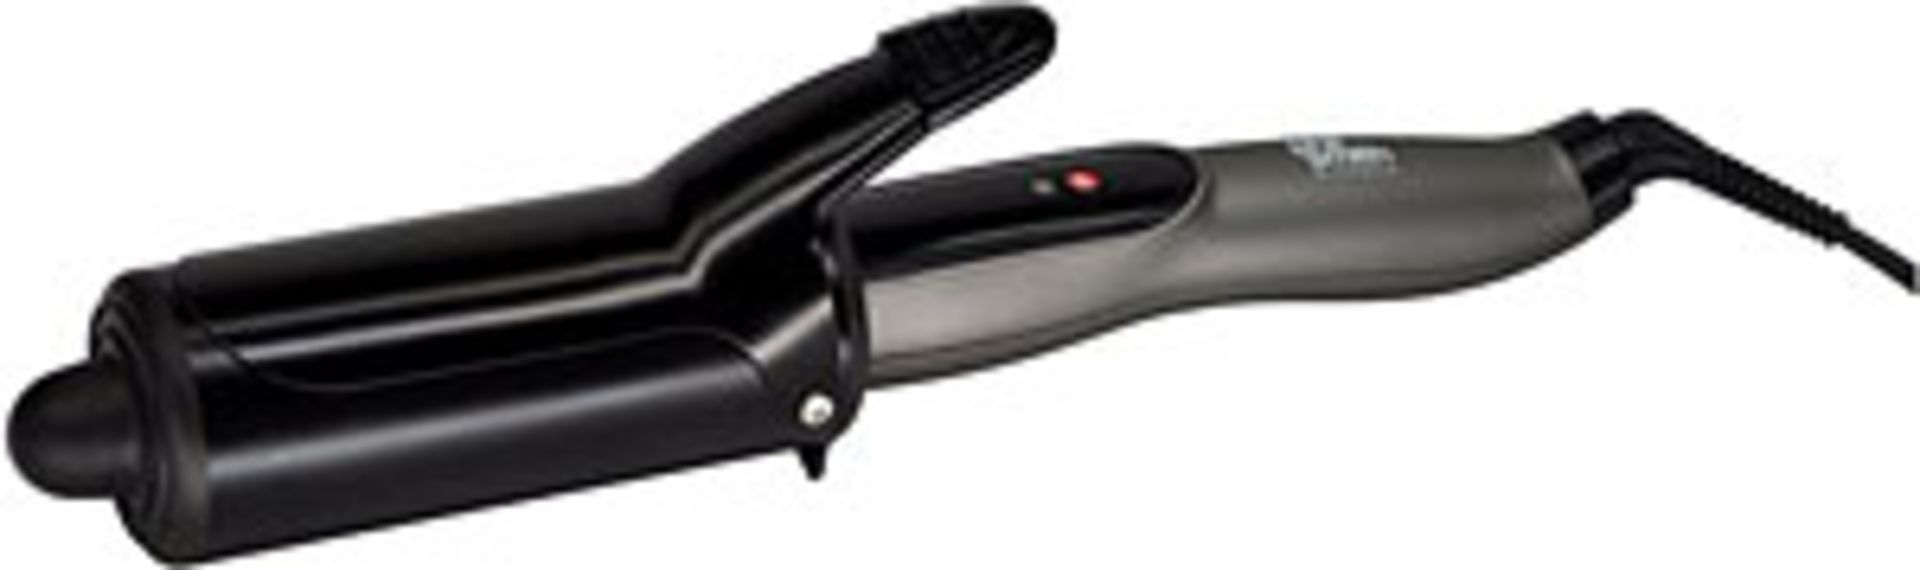 V Brand New Phil Smith Salon Collection Jumbo Hair Curler Fast Curls With No Kinks